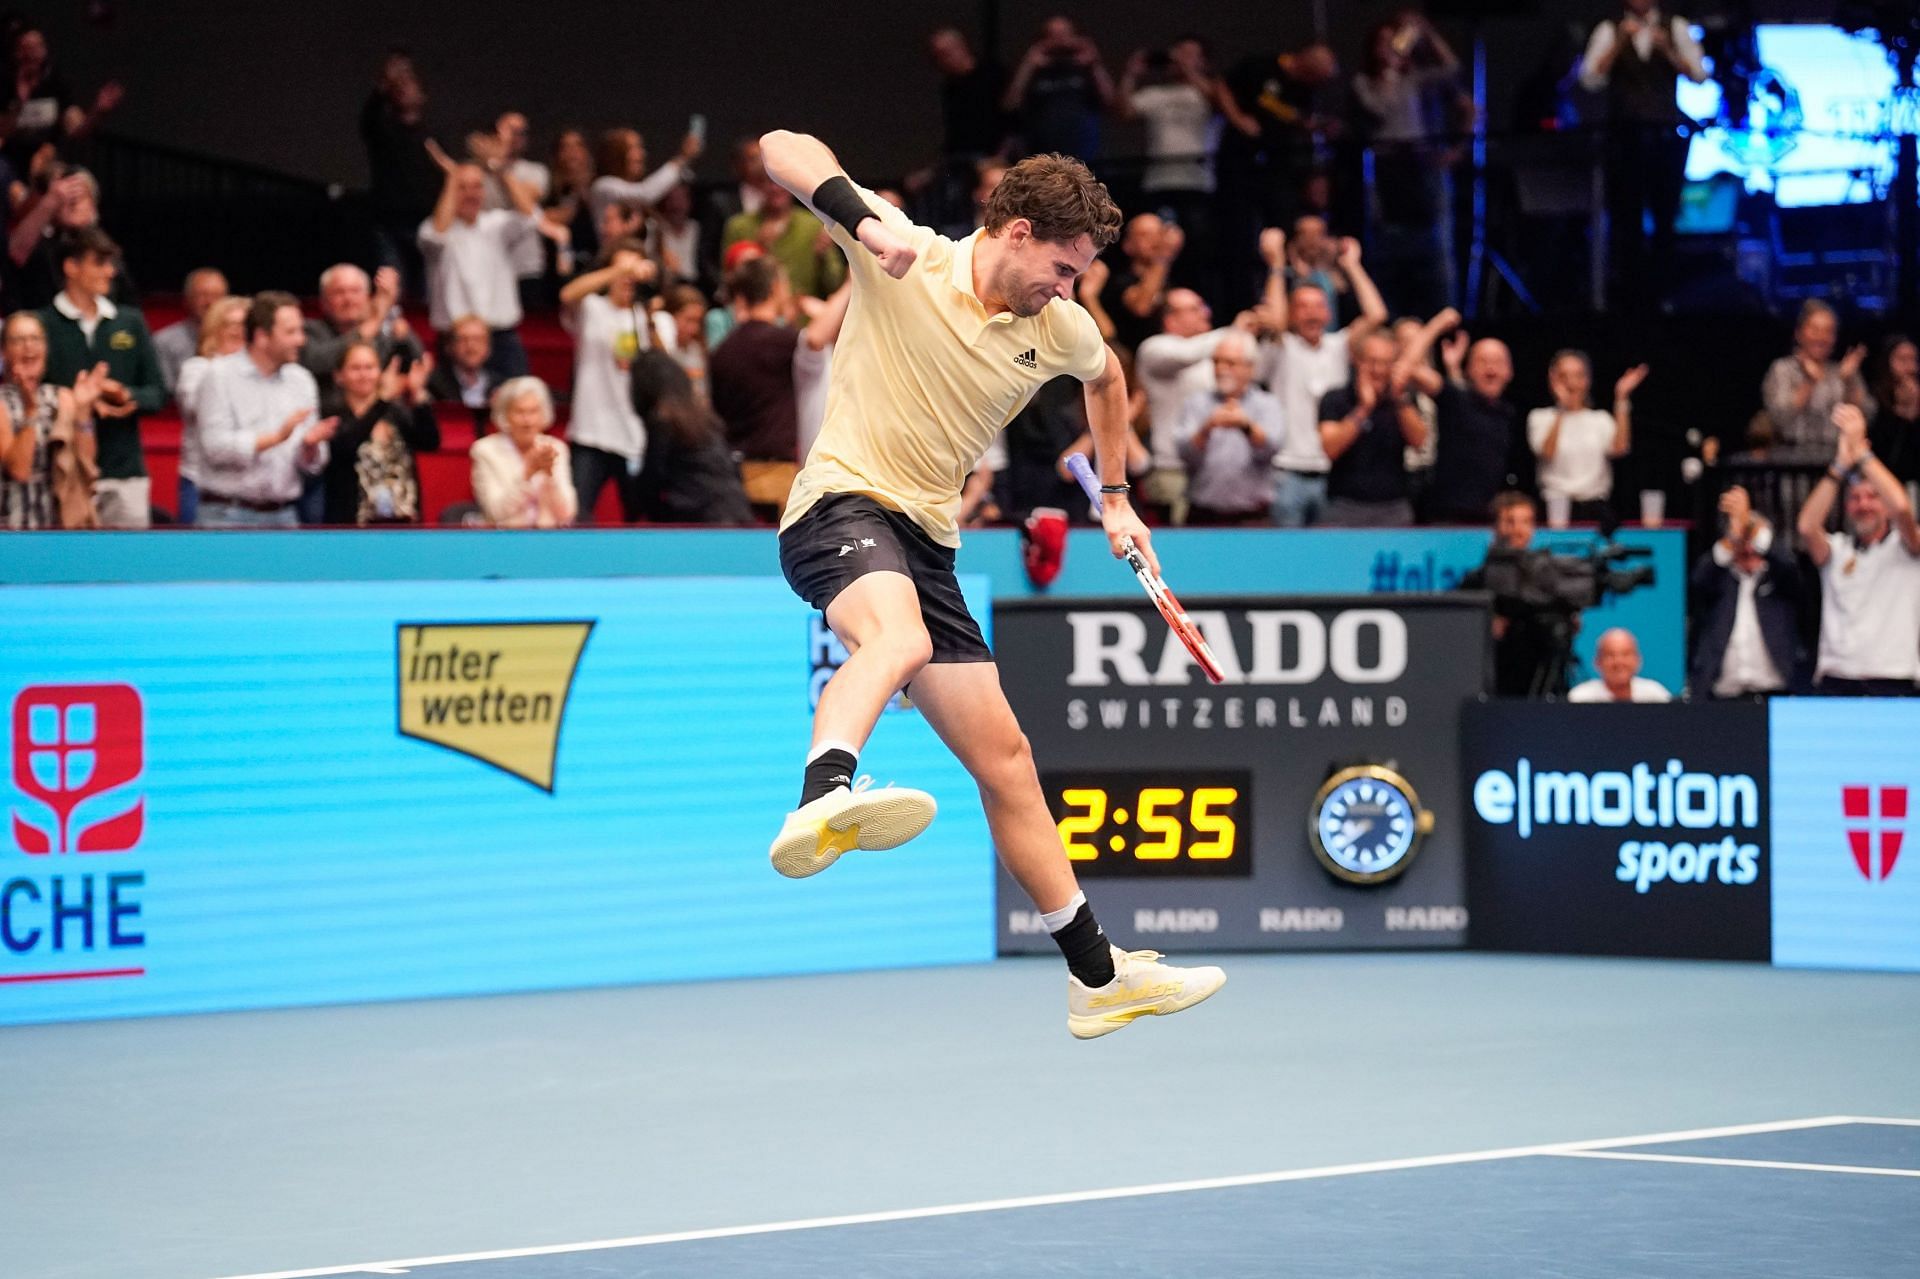 Watch: Dominic Thiem falls to the floor in exultation after